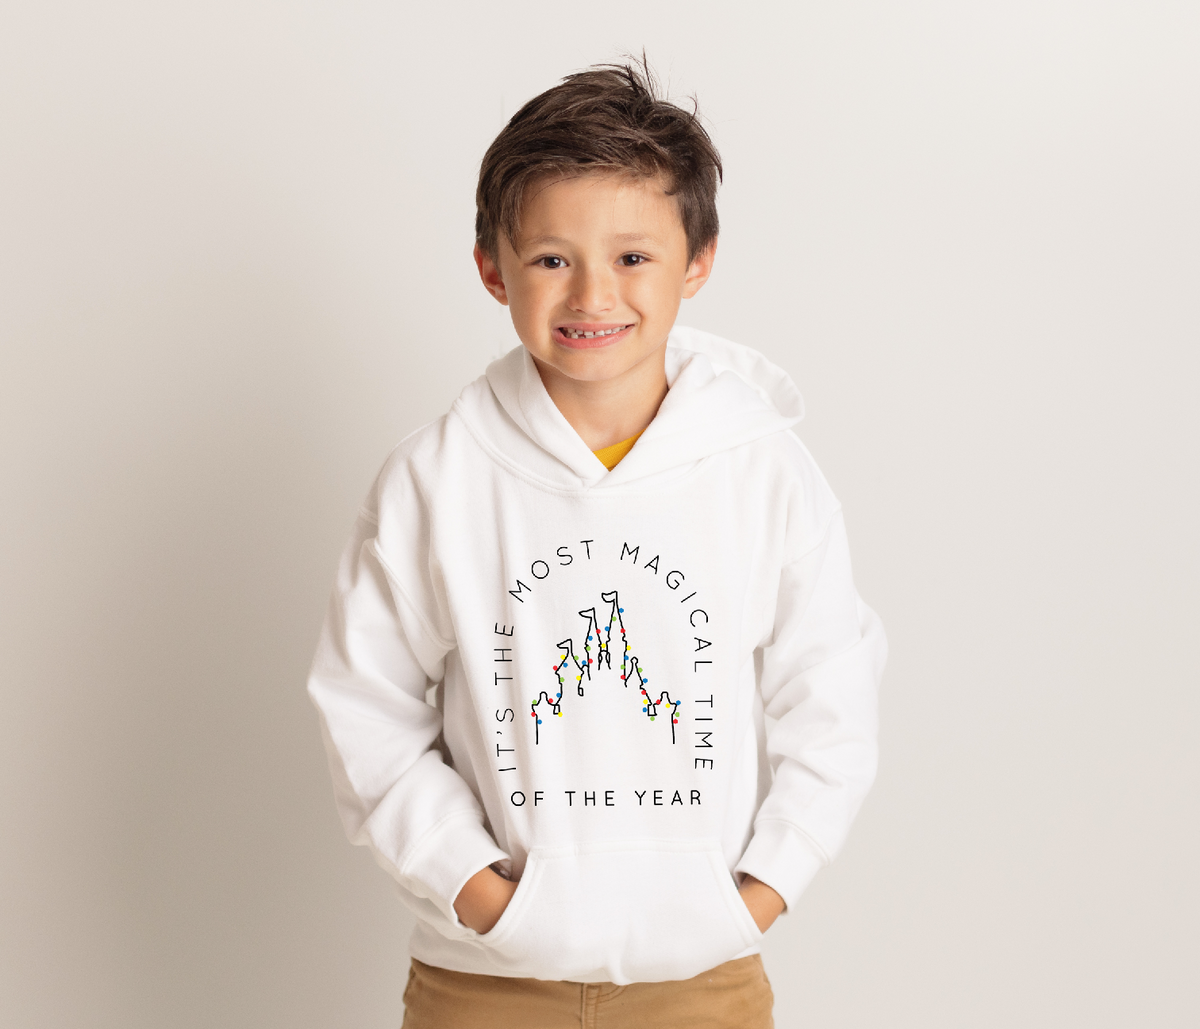 Most Magical Time Of The Year Gildan Youth Heavy Blend Hooded Sweatshirt